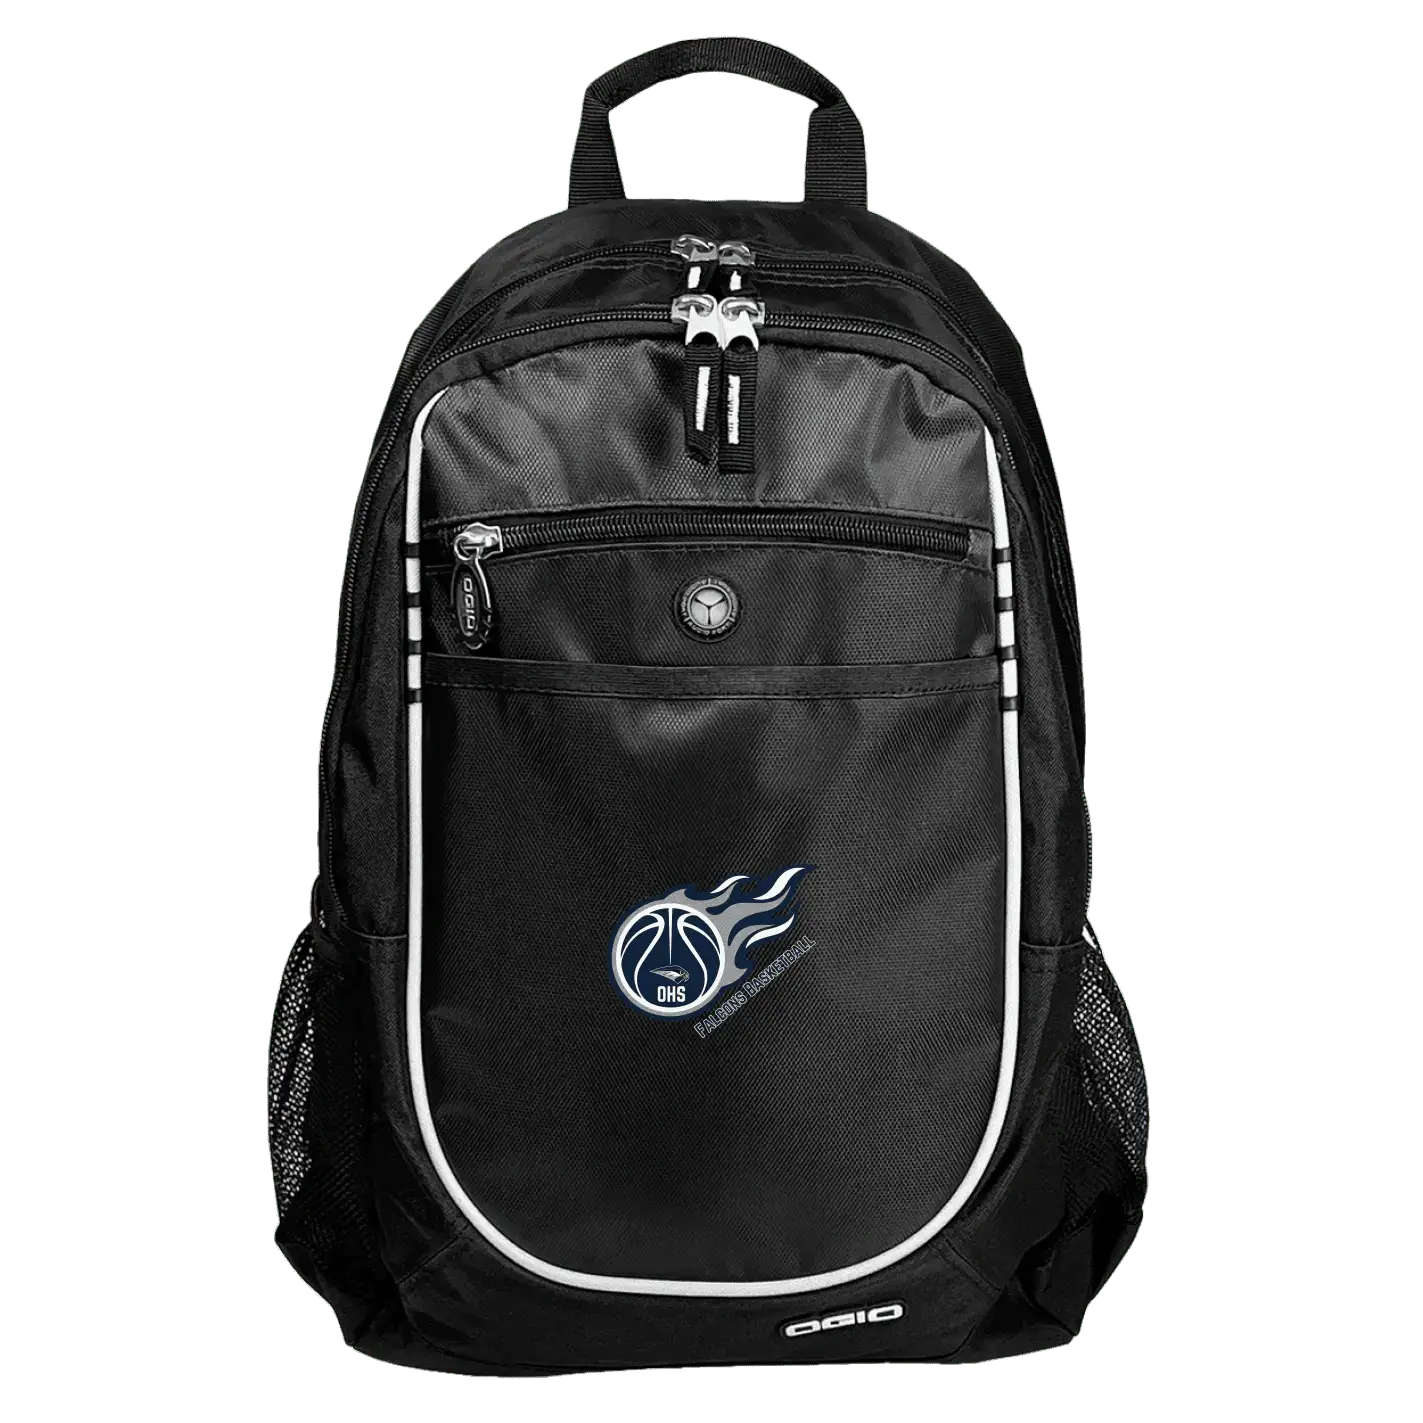 OHS Basketball Bags